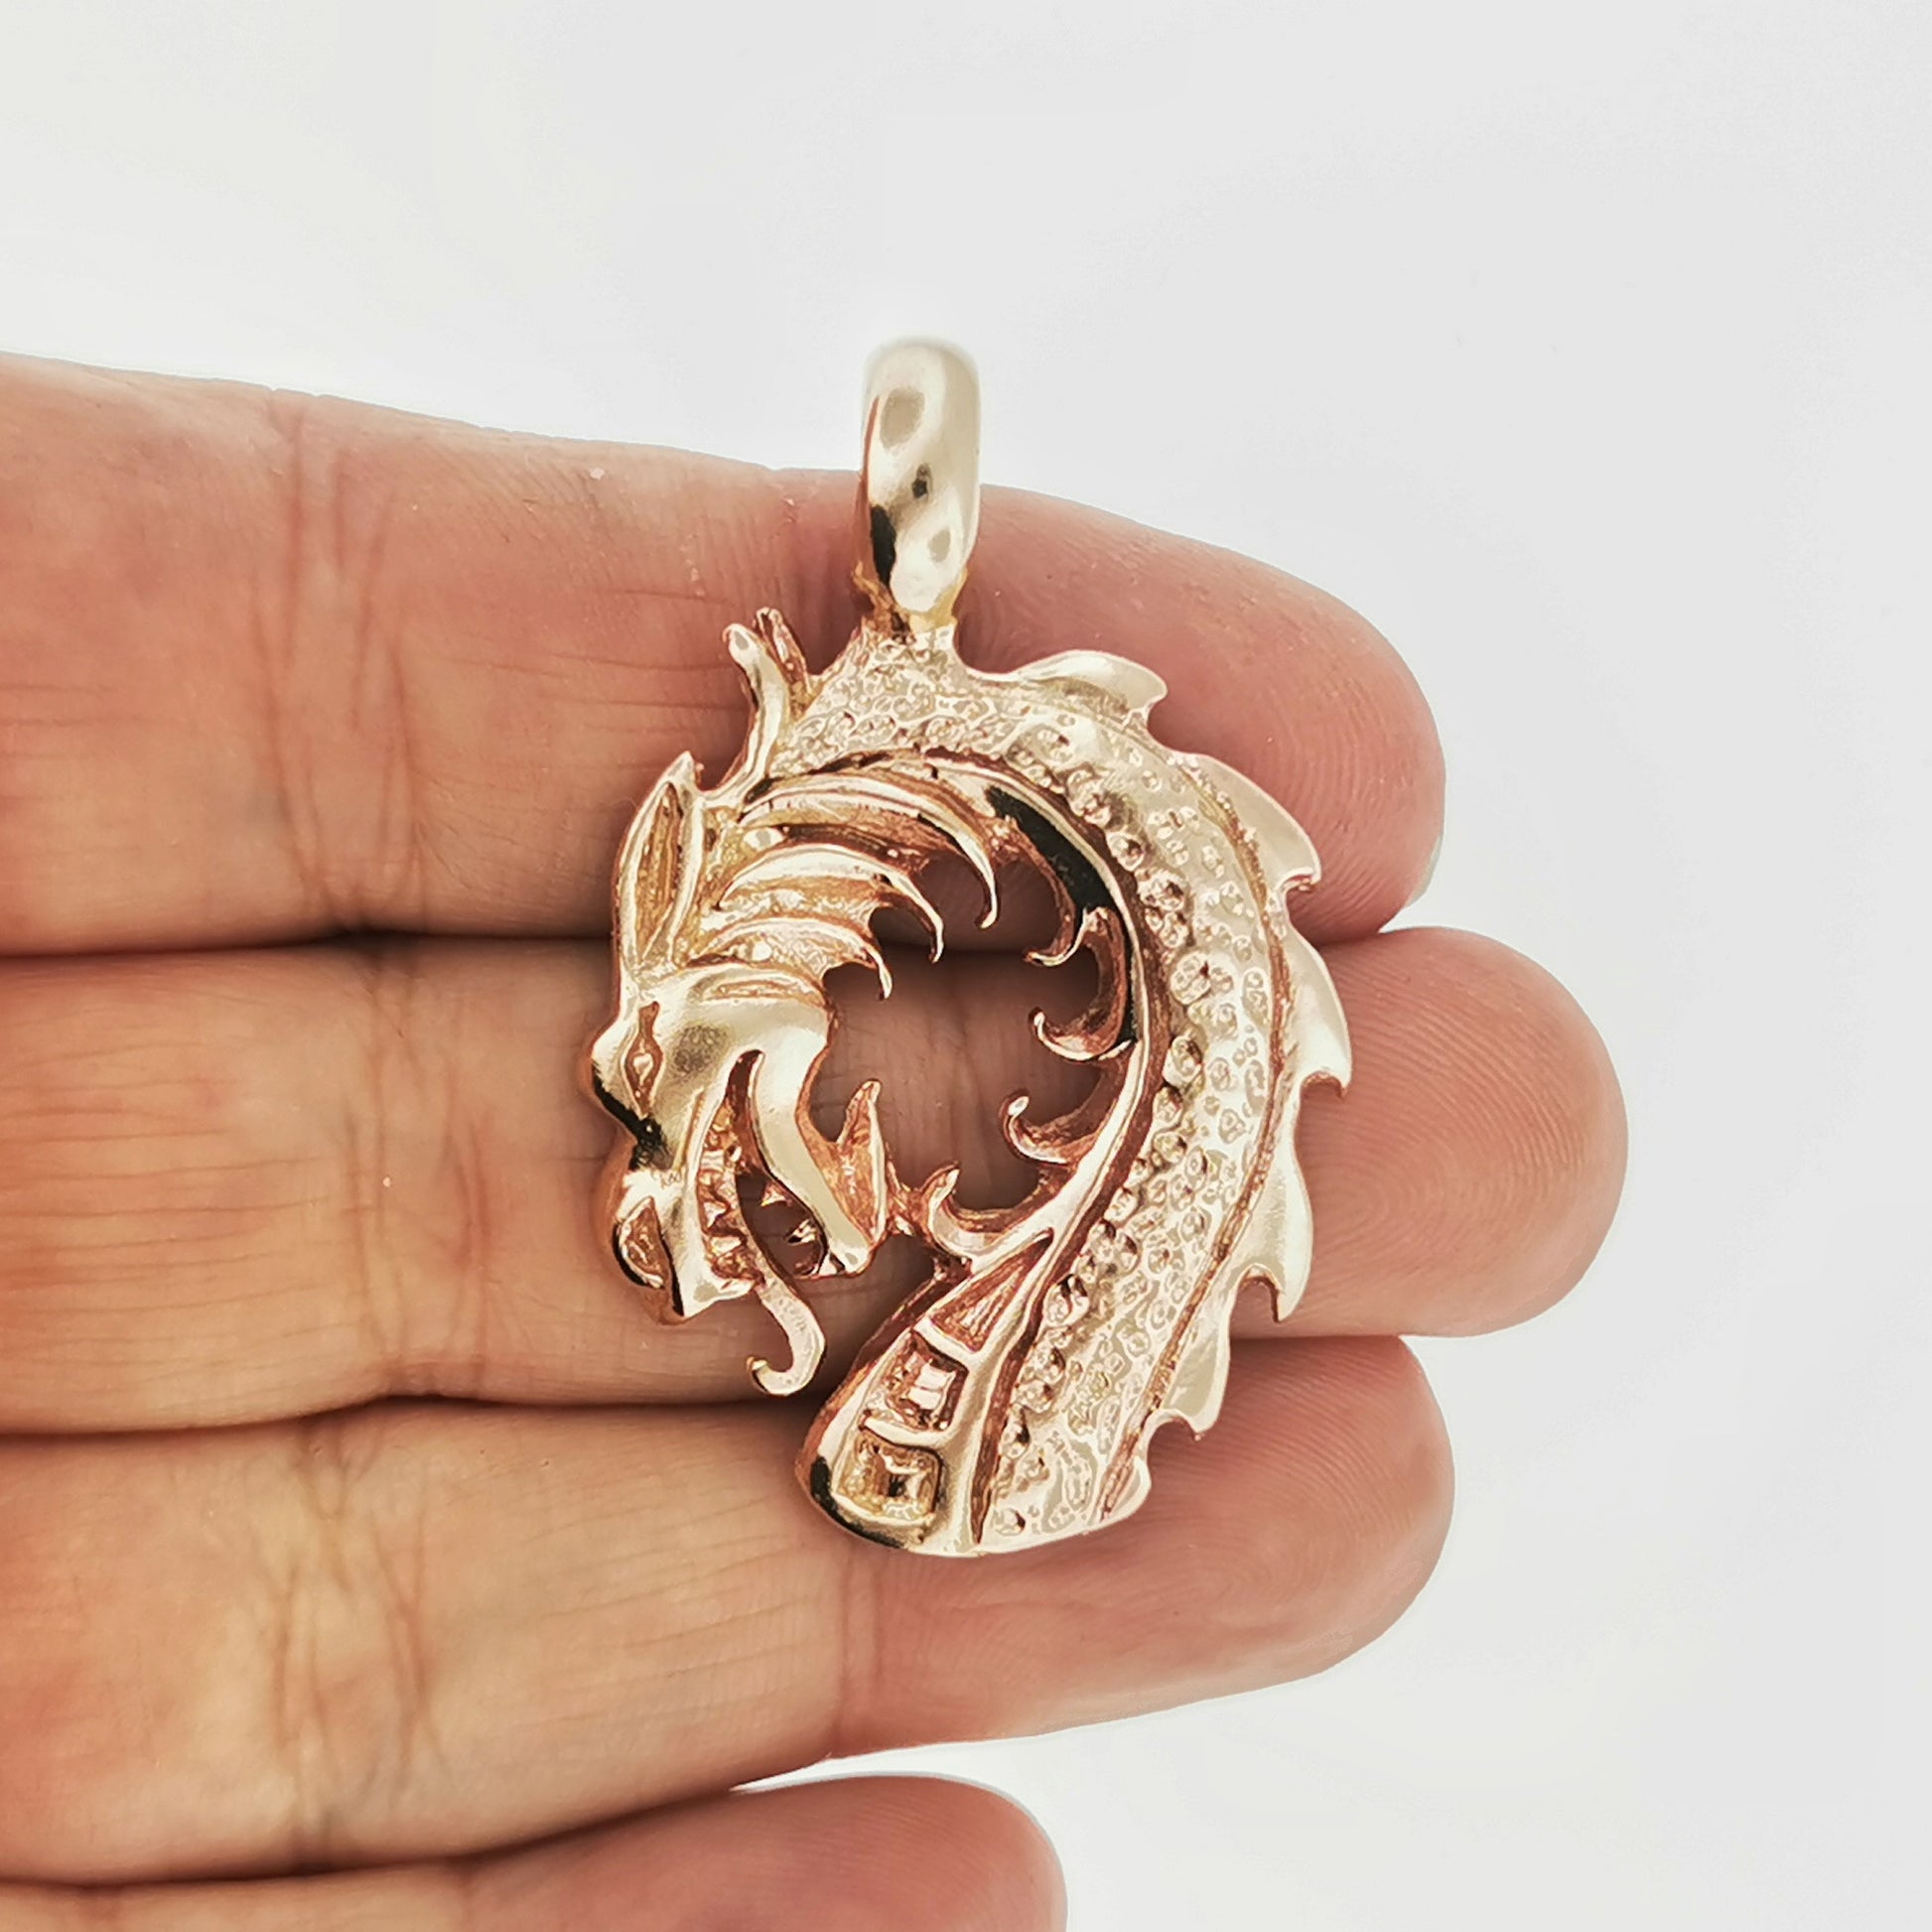 Large Dragon Head Pendant in Silver or Bronze, Dragon Jewellery, Dragon Lover Gifts for Him, Viking Dragon Jewellery, Mens Dragon Necklace, Dragon Lover Jewellery, Bronze Dragon Pendant, Bronze Dragon Jewelry, Mens Dragon Pendant, Dragon Head Pendant